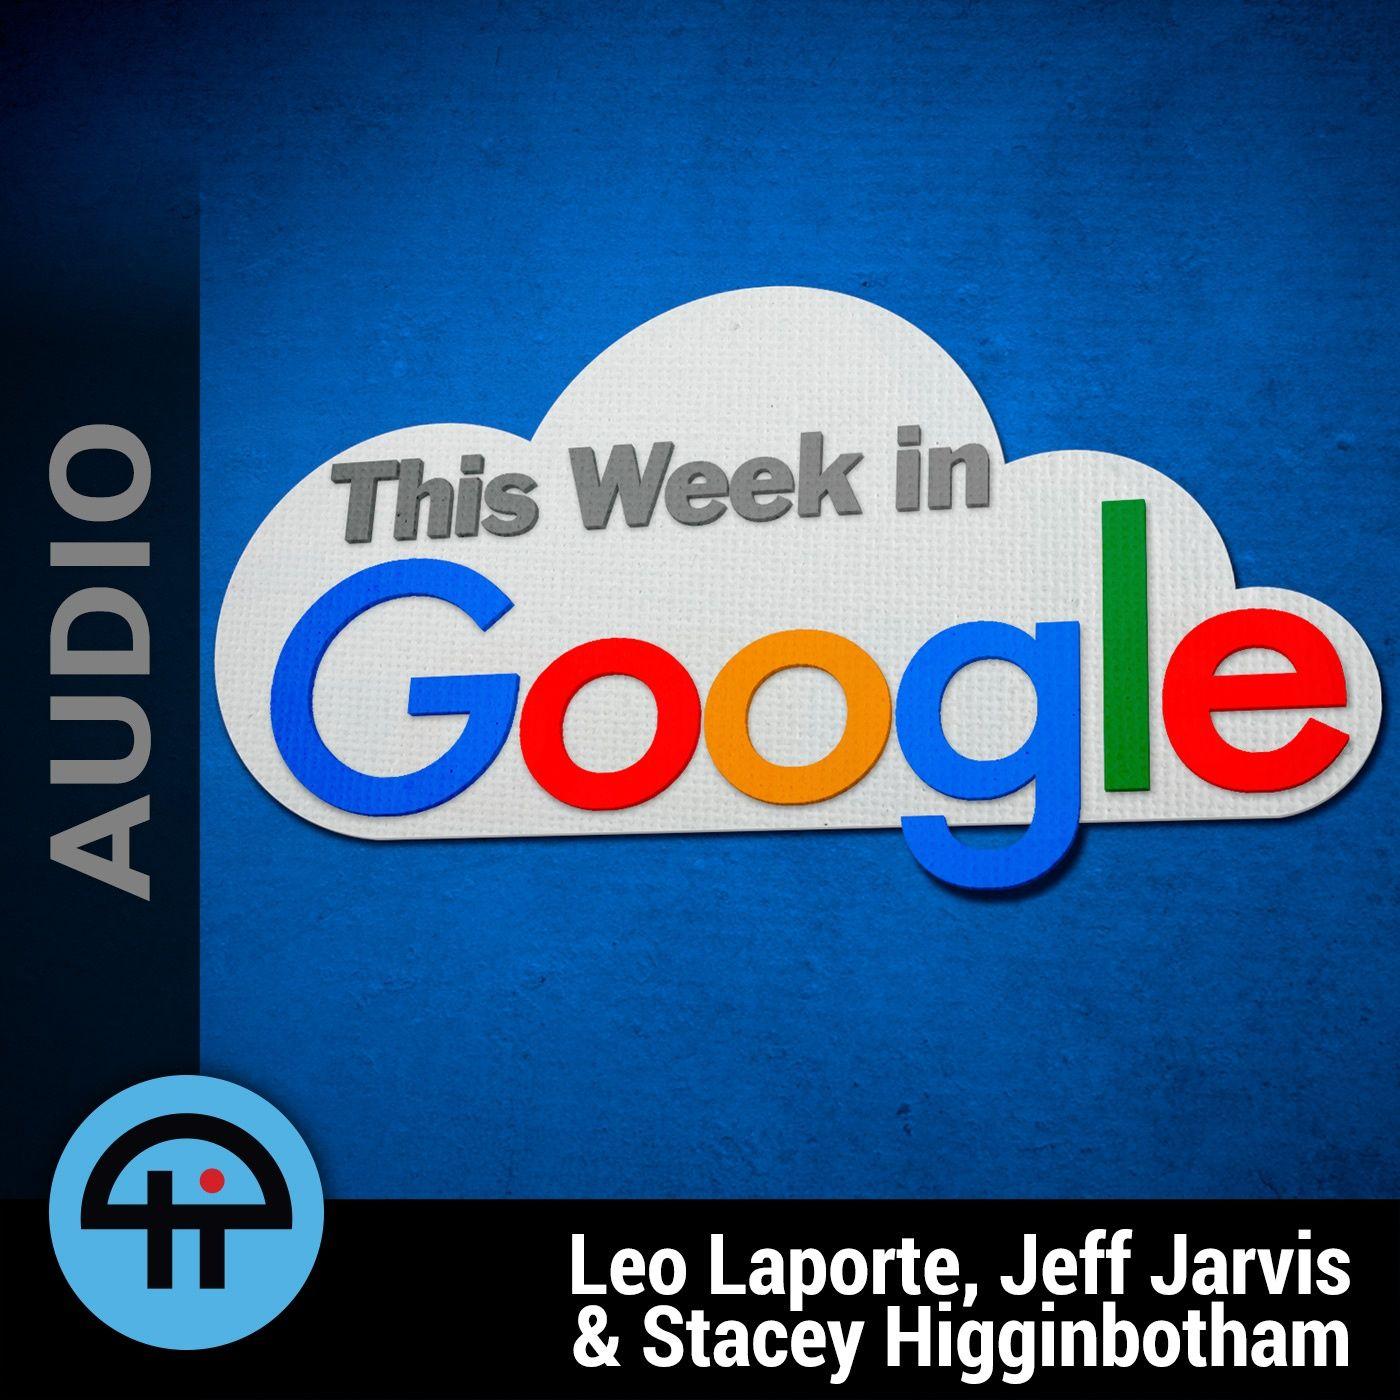 GoogleVideo Logo - This Week in Google (Video LO) by TWiT TV on Apple Podcasts